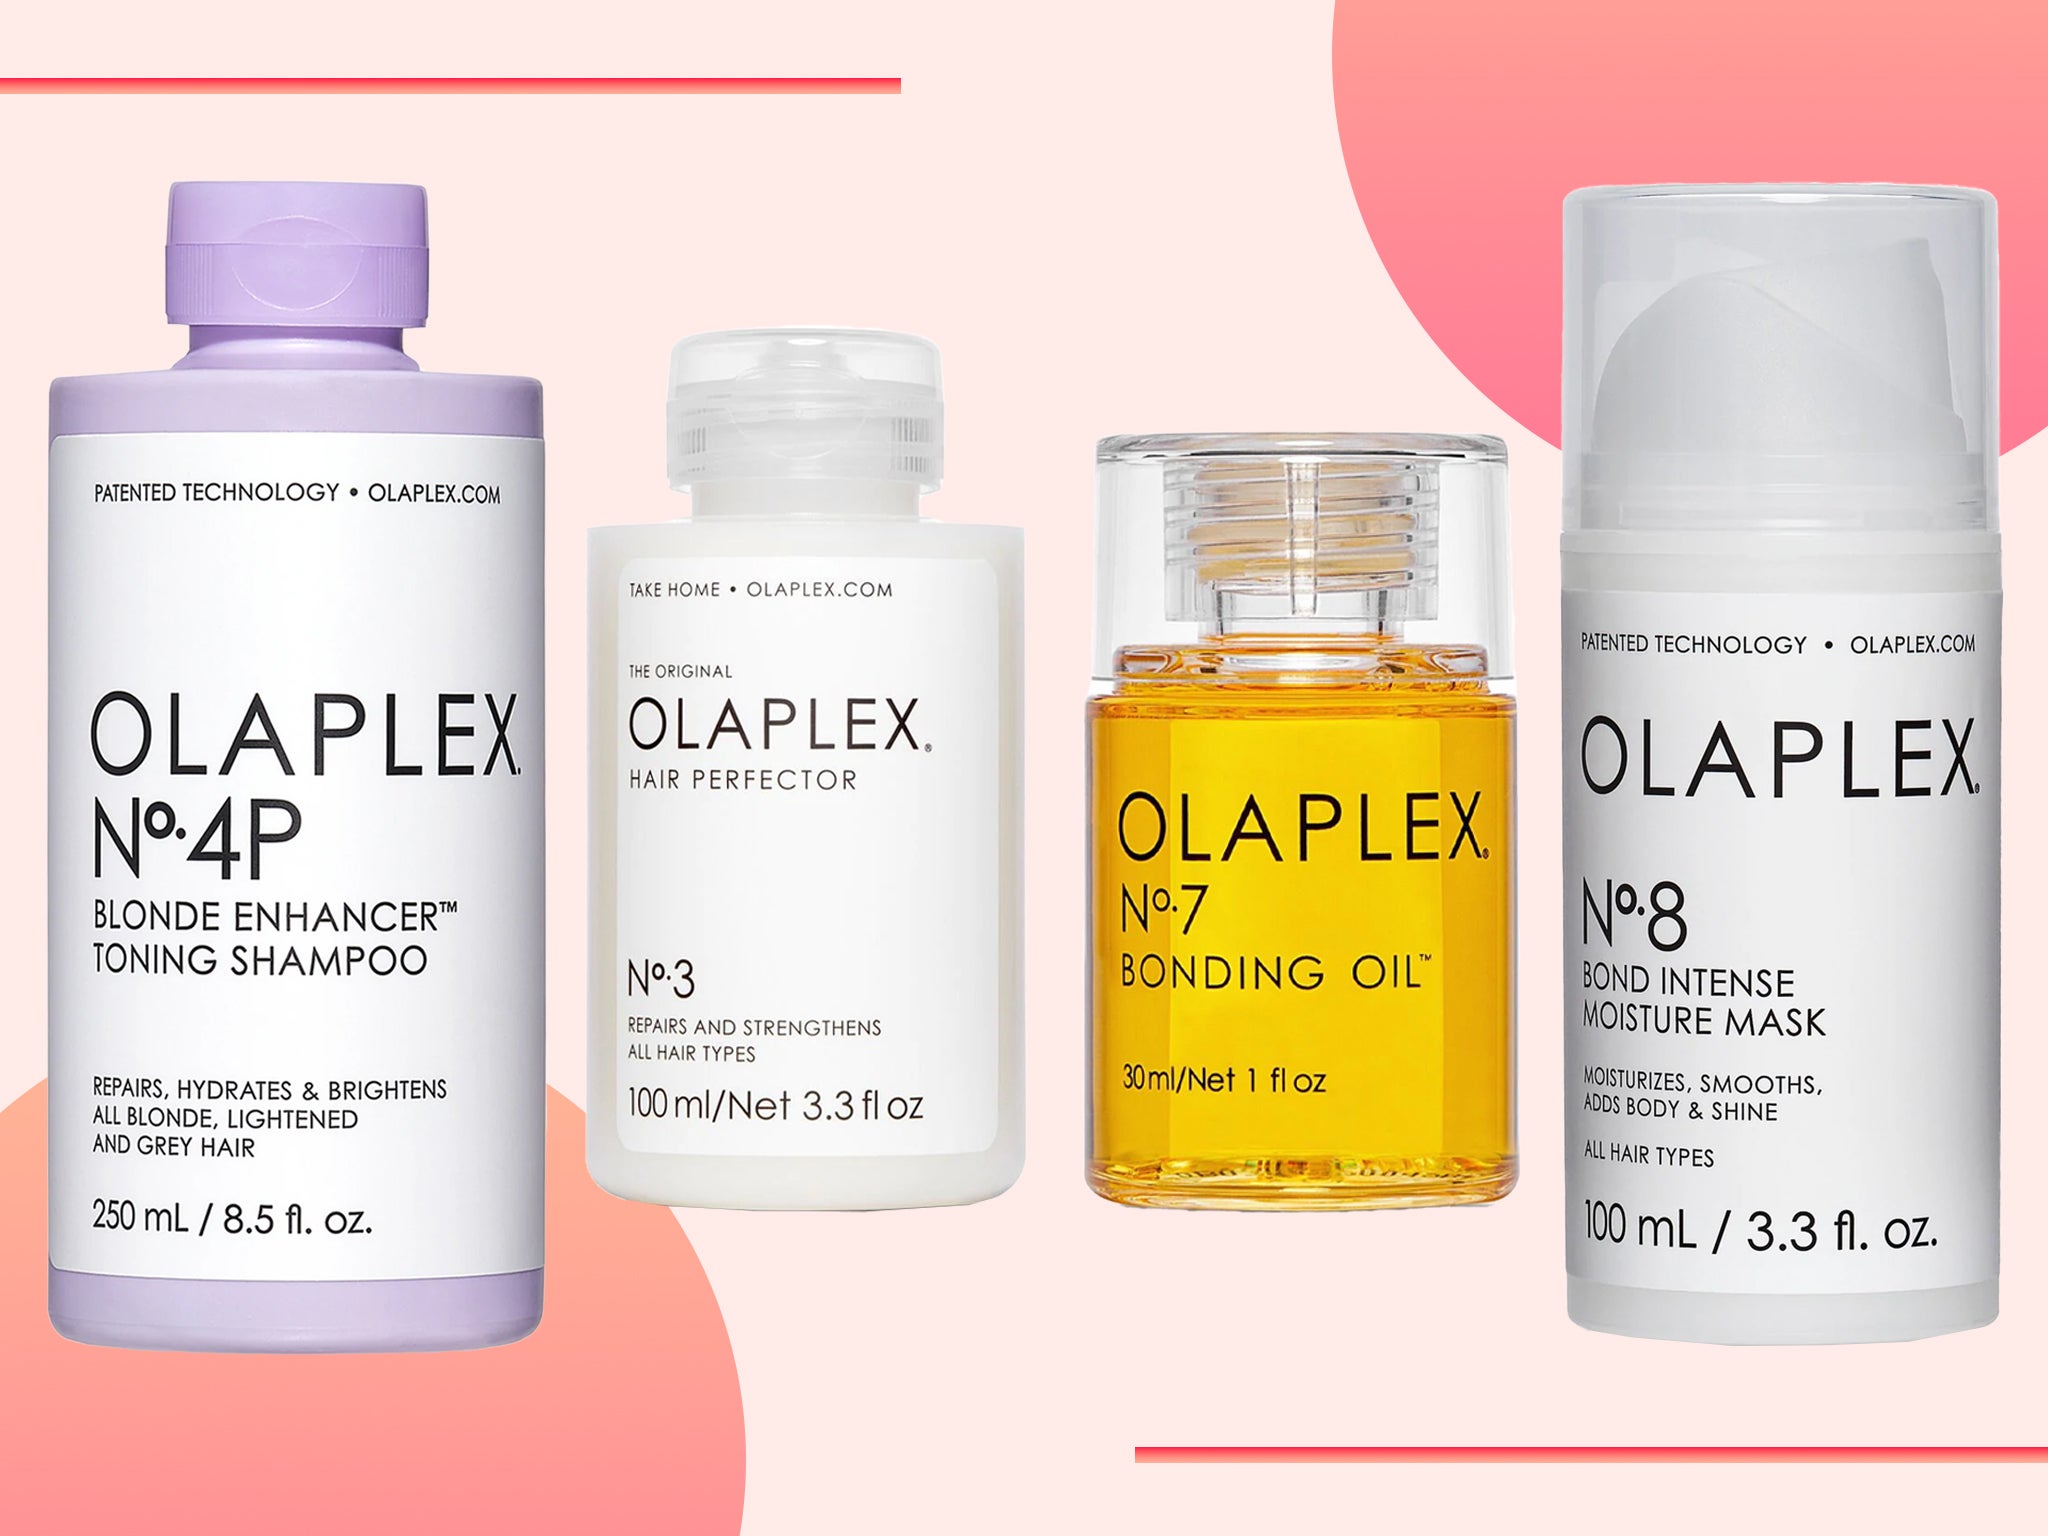 Paseo Meloso Referéndum Olaplex review: The hair products repaired my damaged locks | The  Independent